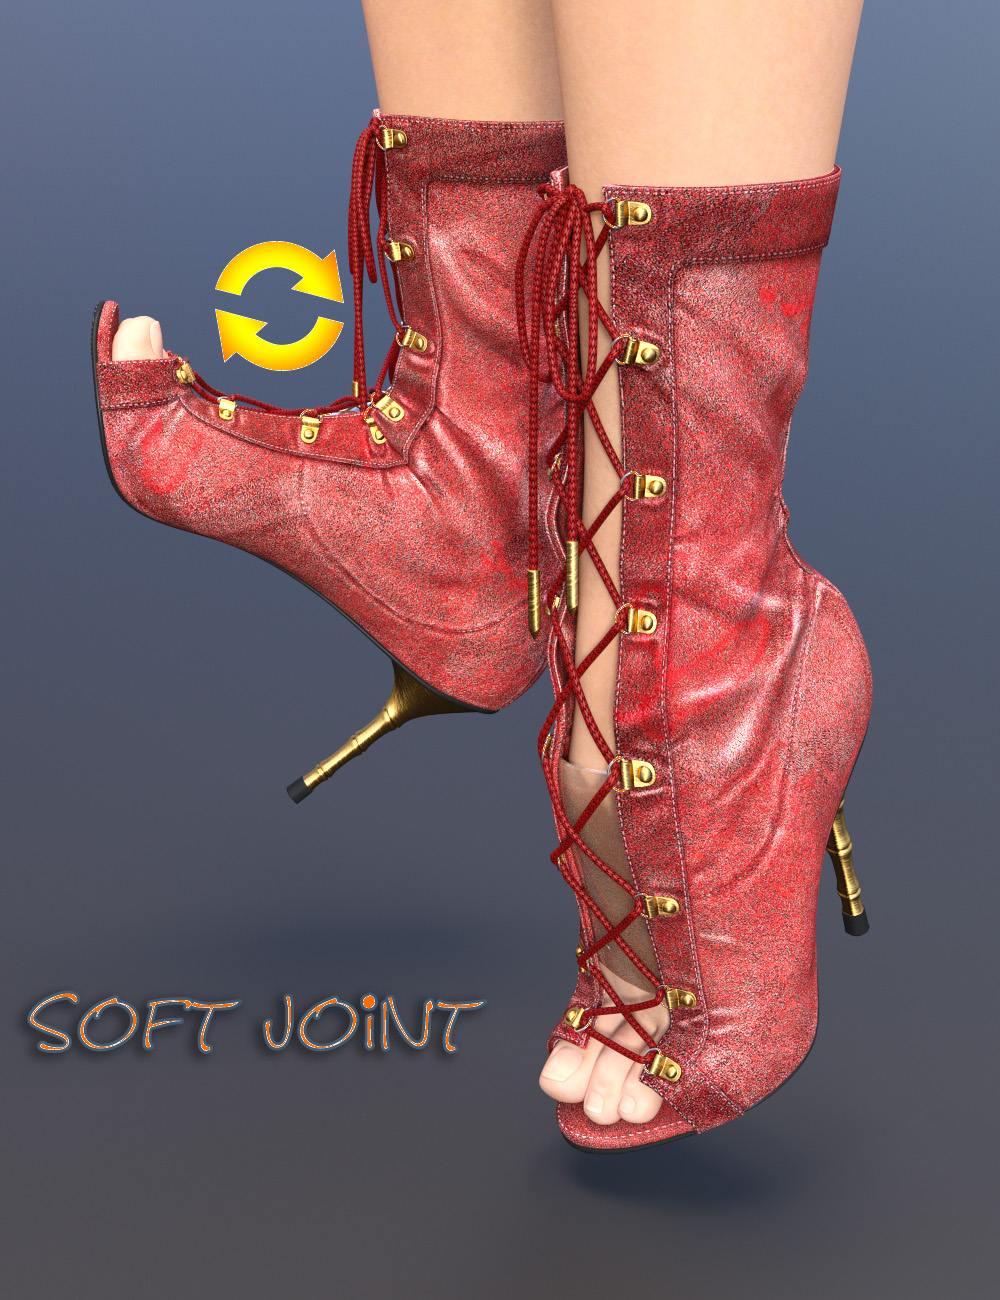 Open Toe Lace Up Boots for Genesis 3 Female(s) by: chungdan, 3D Models by Daz 3D